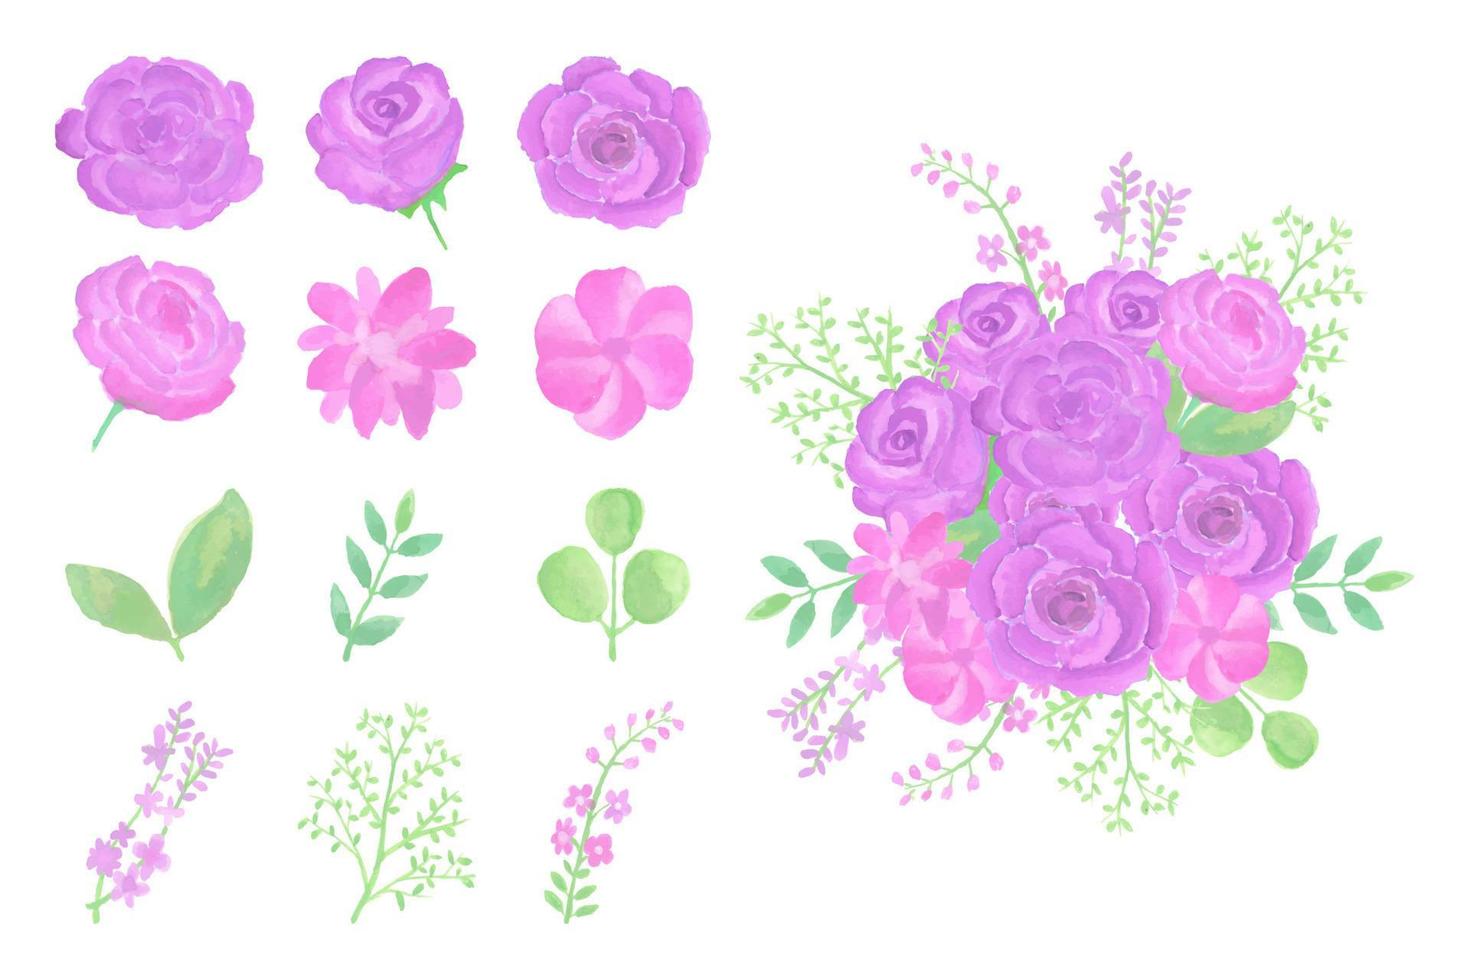 Collection of handmade watercolor flower art bouquet hand drawn vector